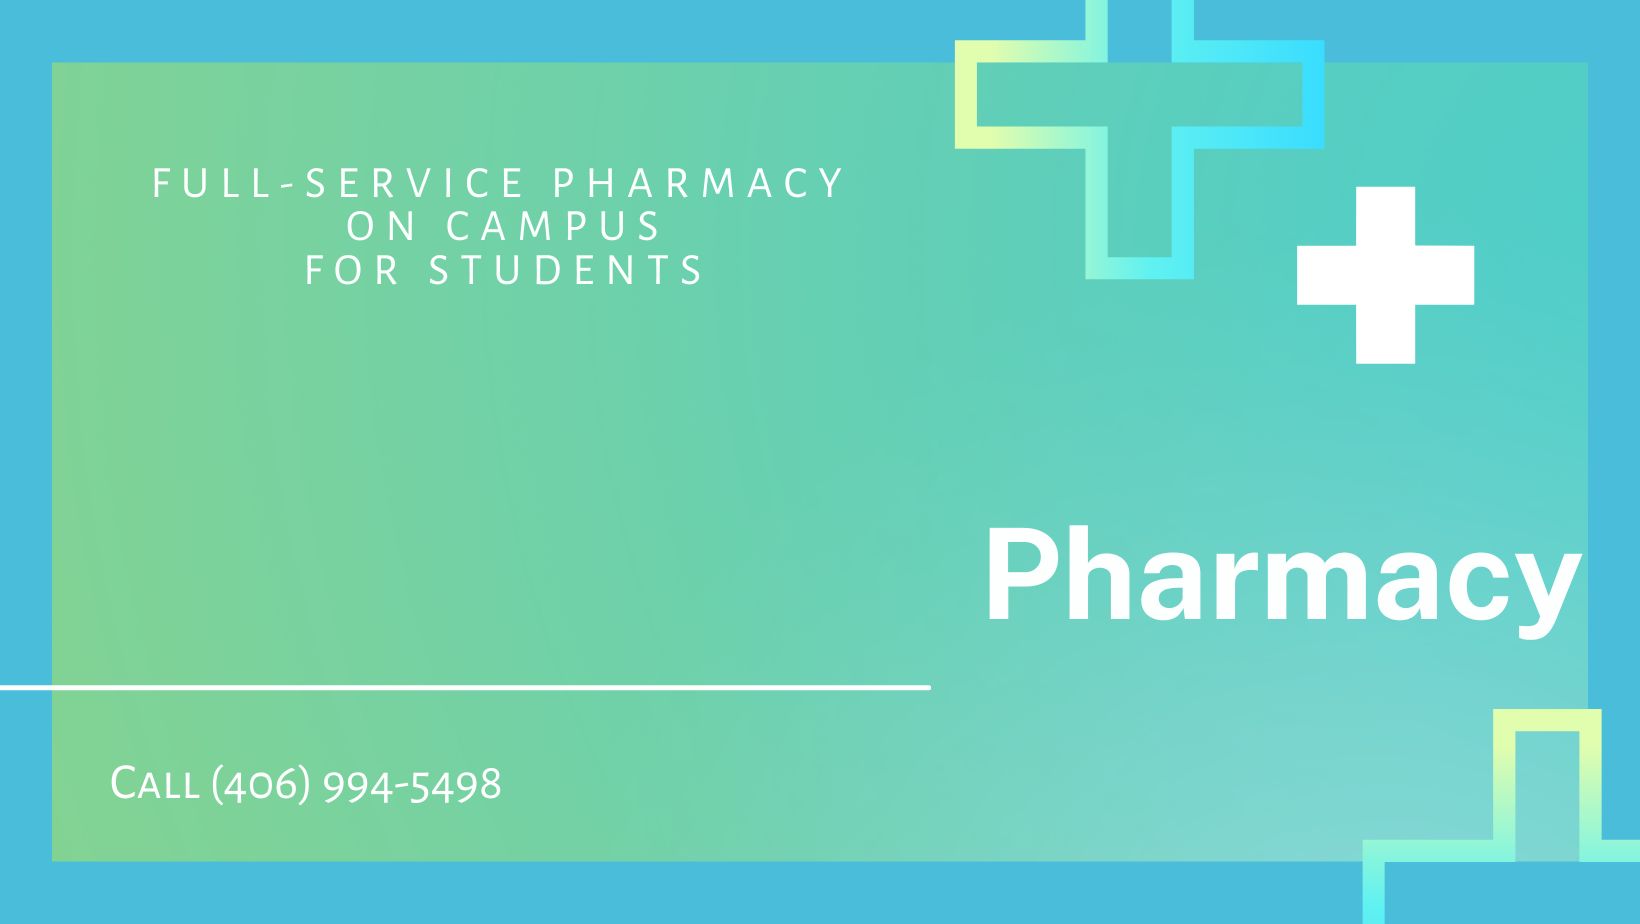 Full-Service pharmacy on campus for students